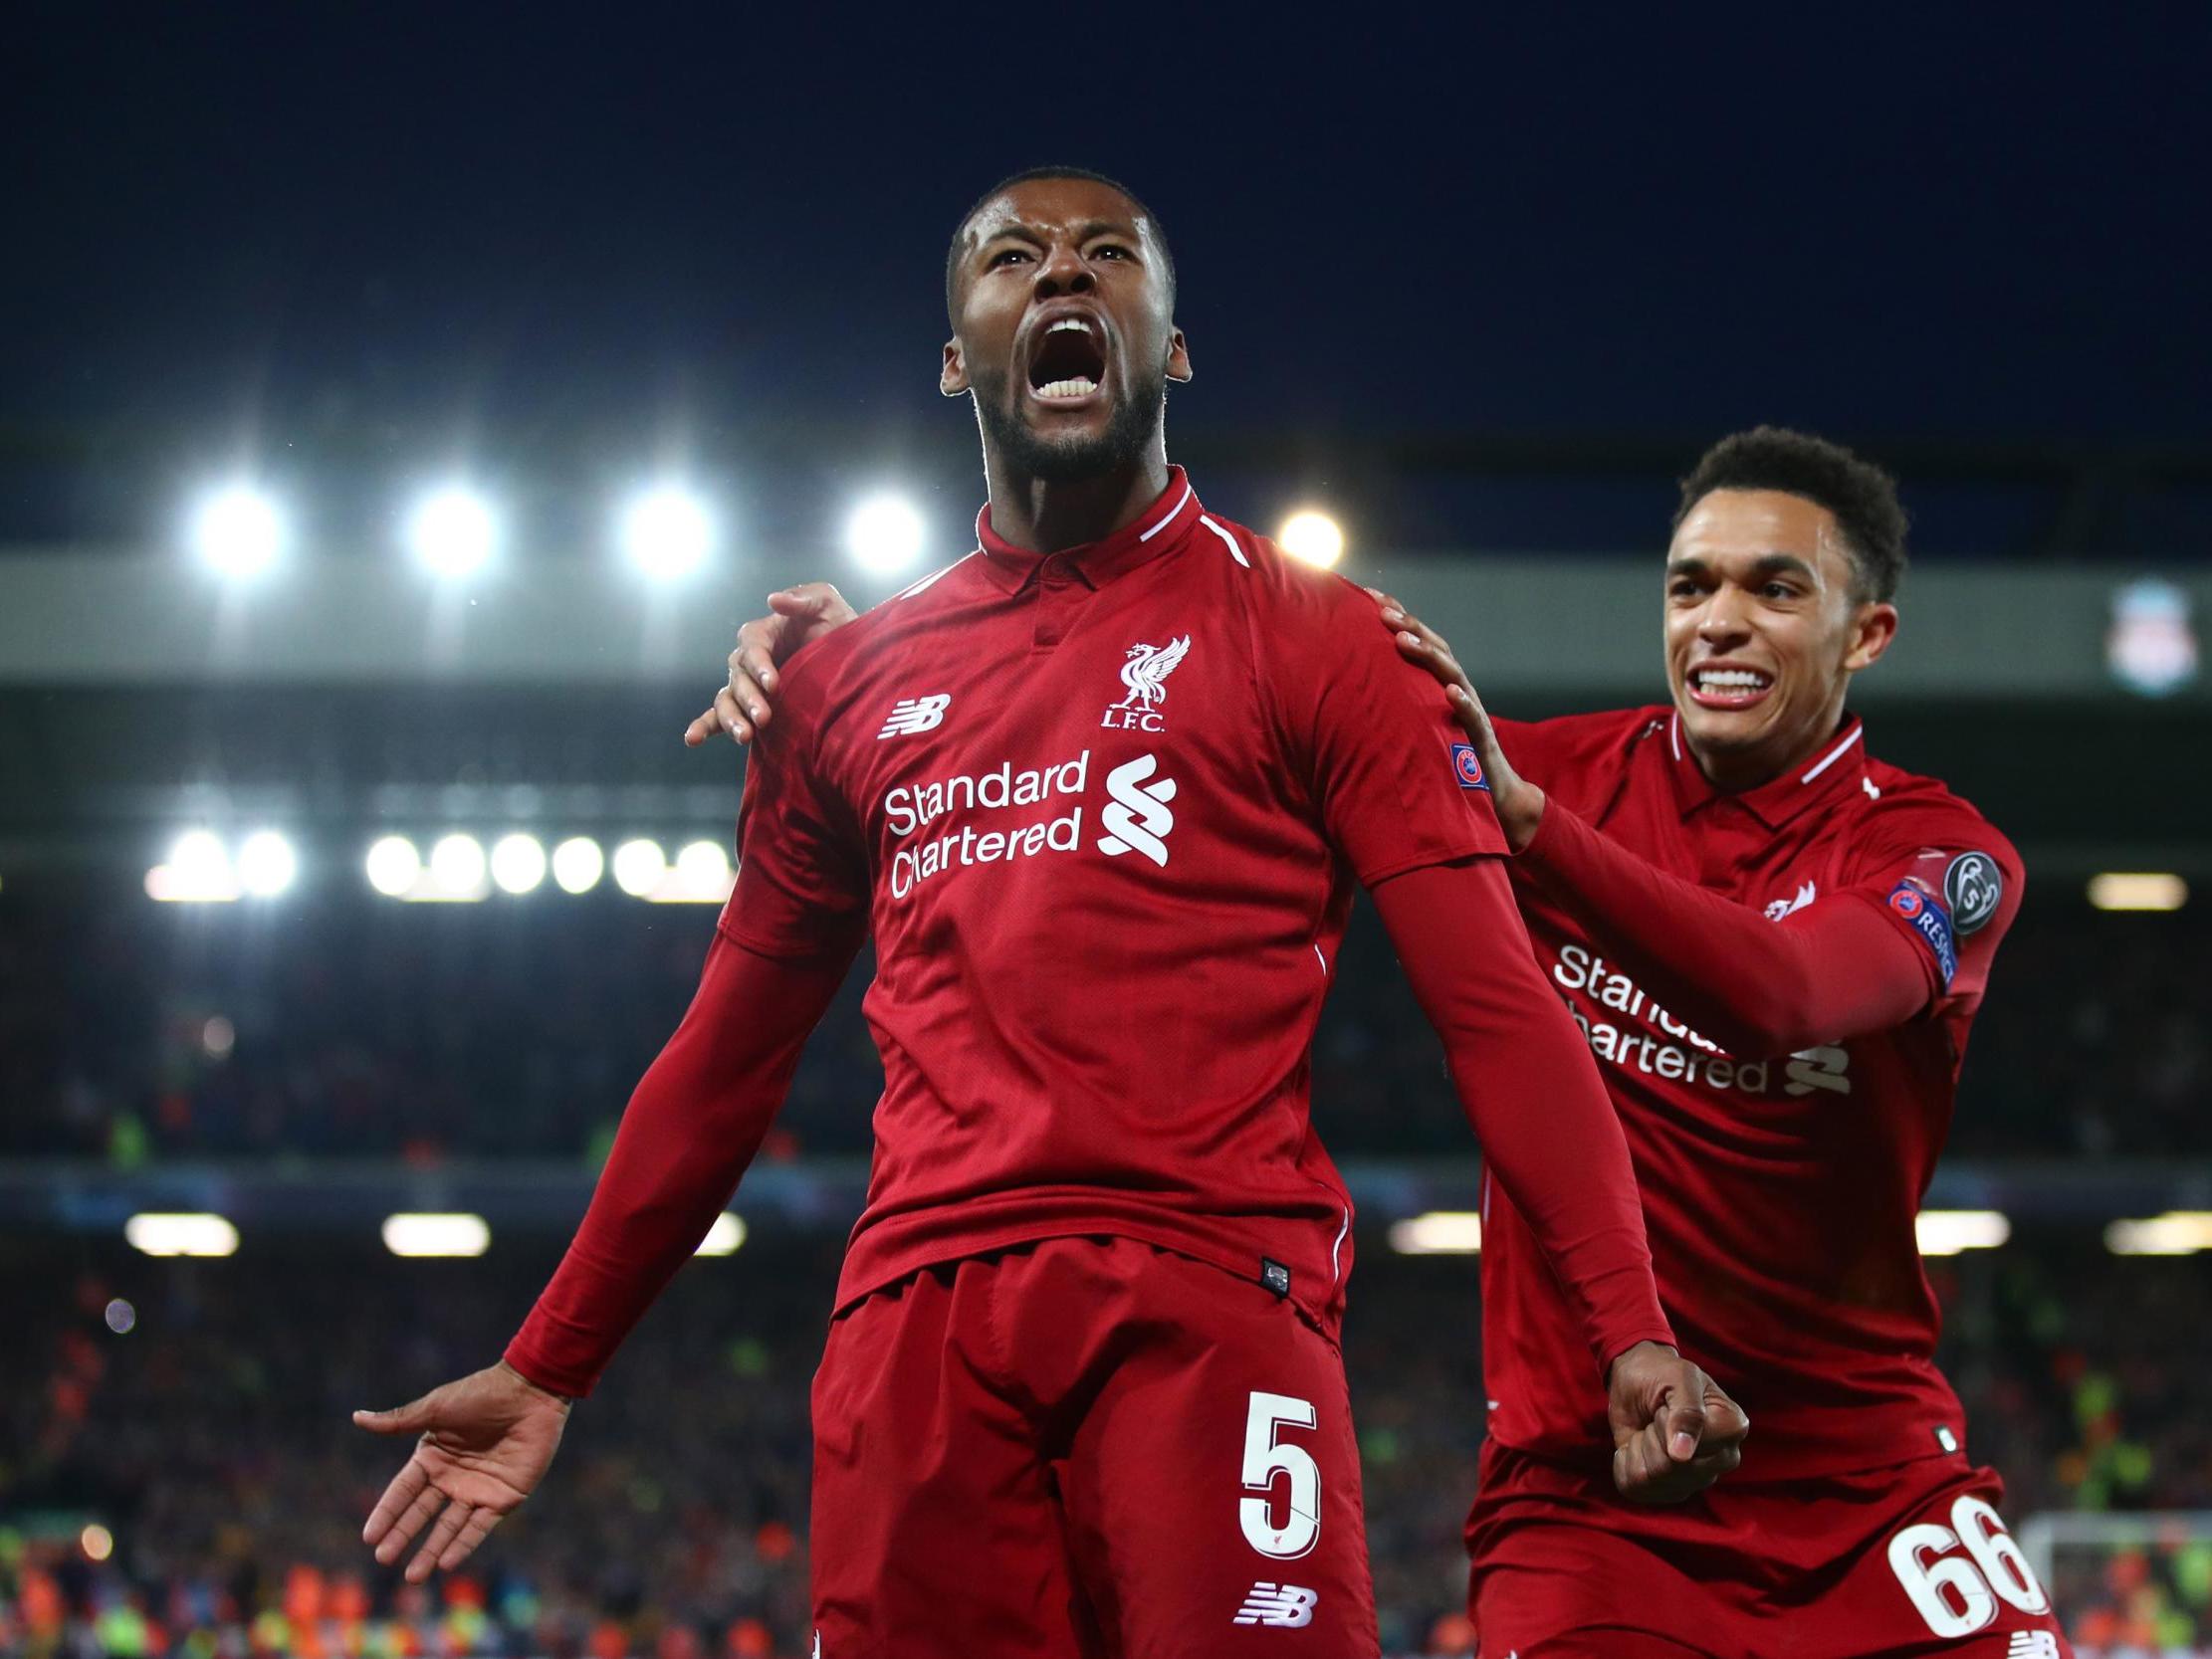 Liverpool vs Barcelona: Georginio Wijnaldum takes out 'anger' on Catalans after starting as substitute